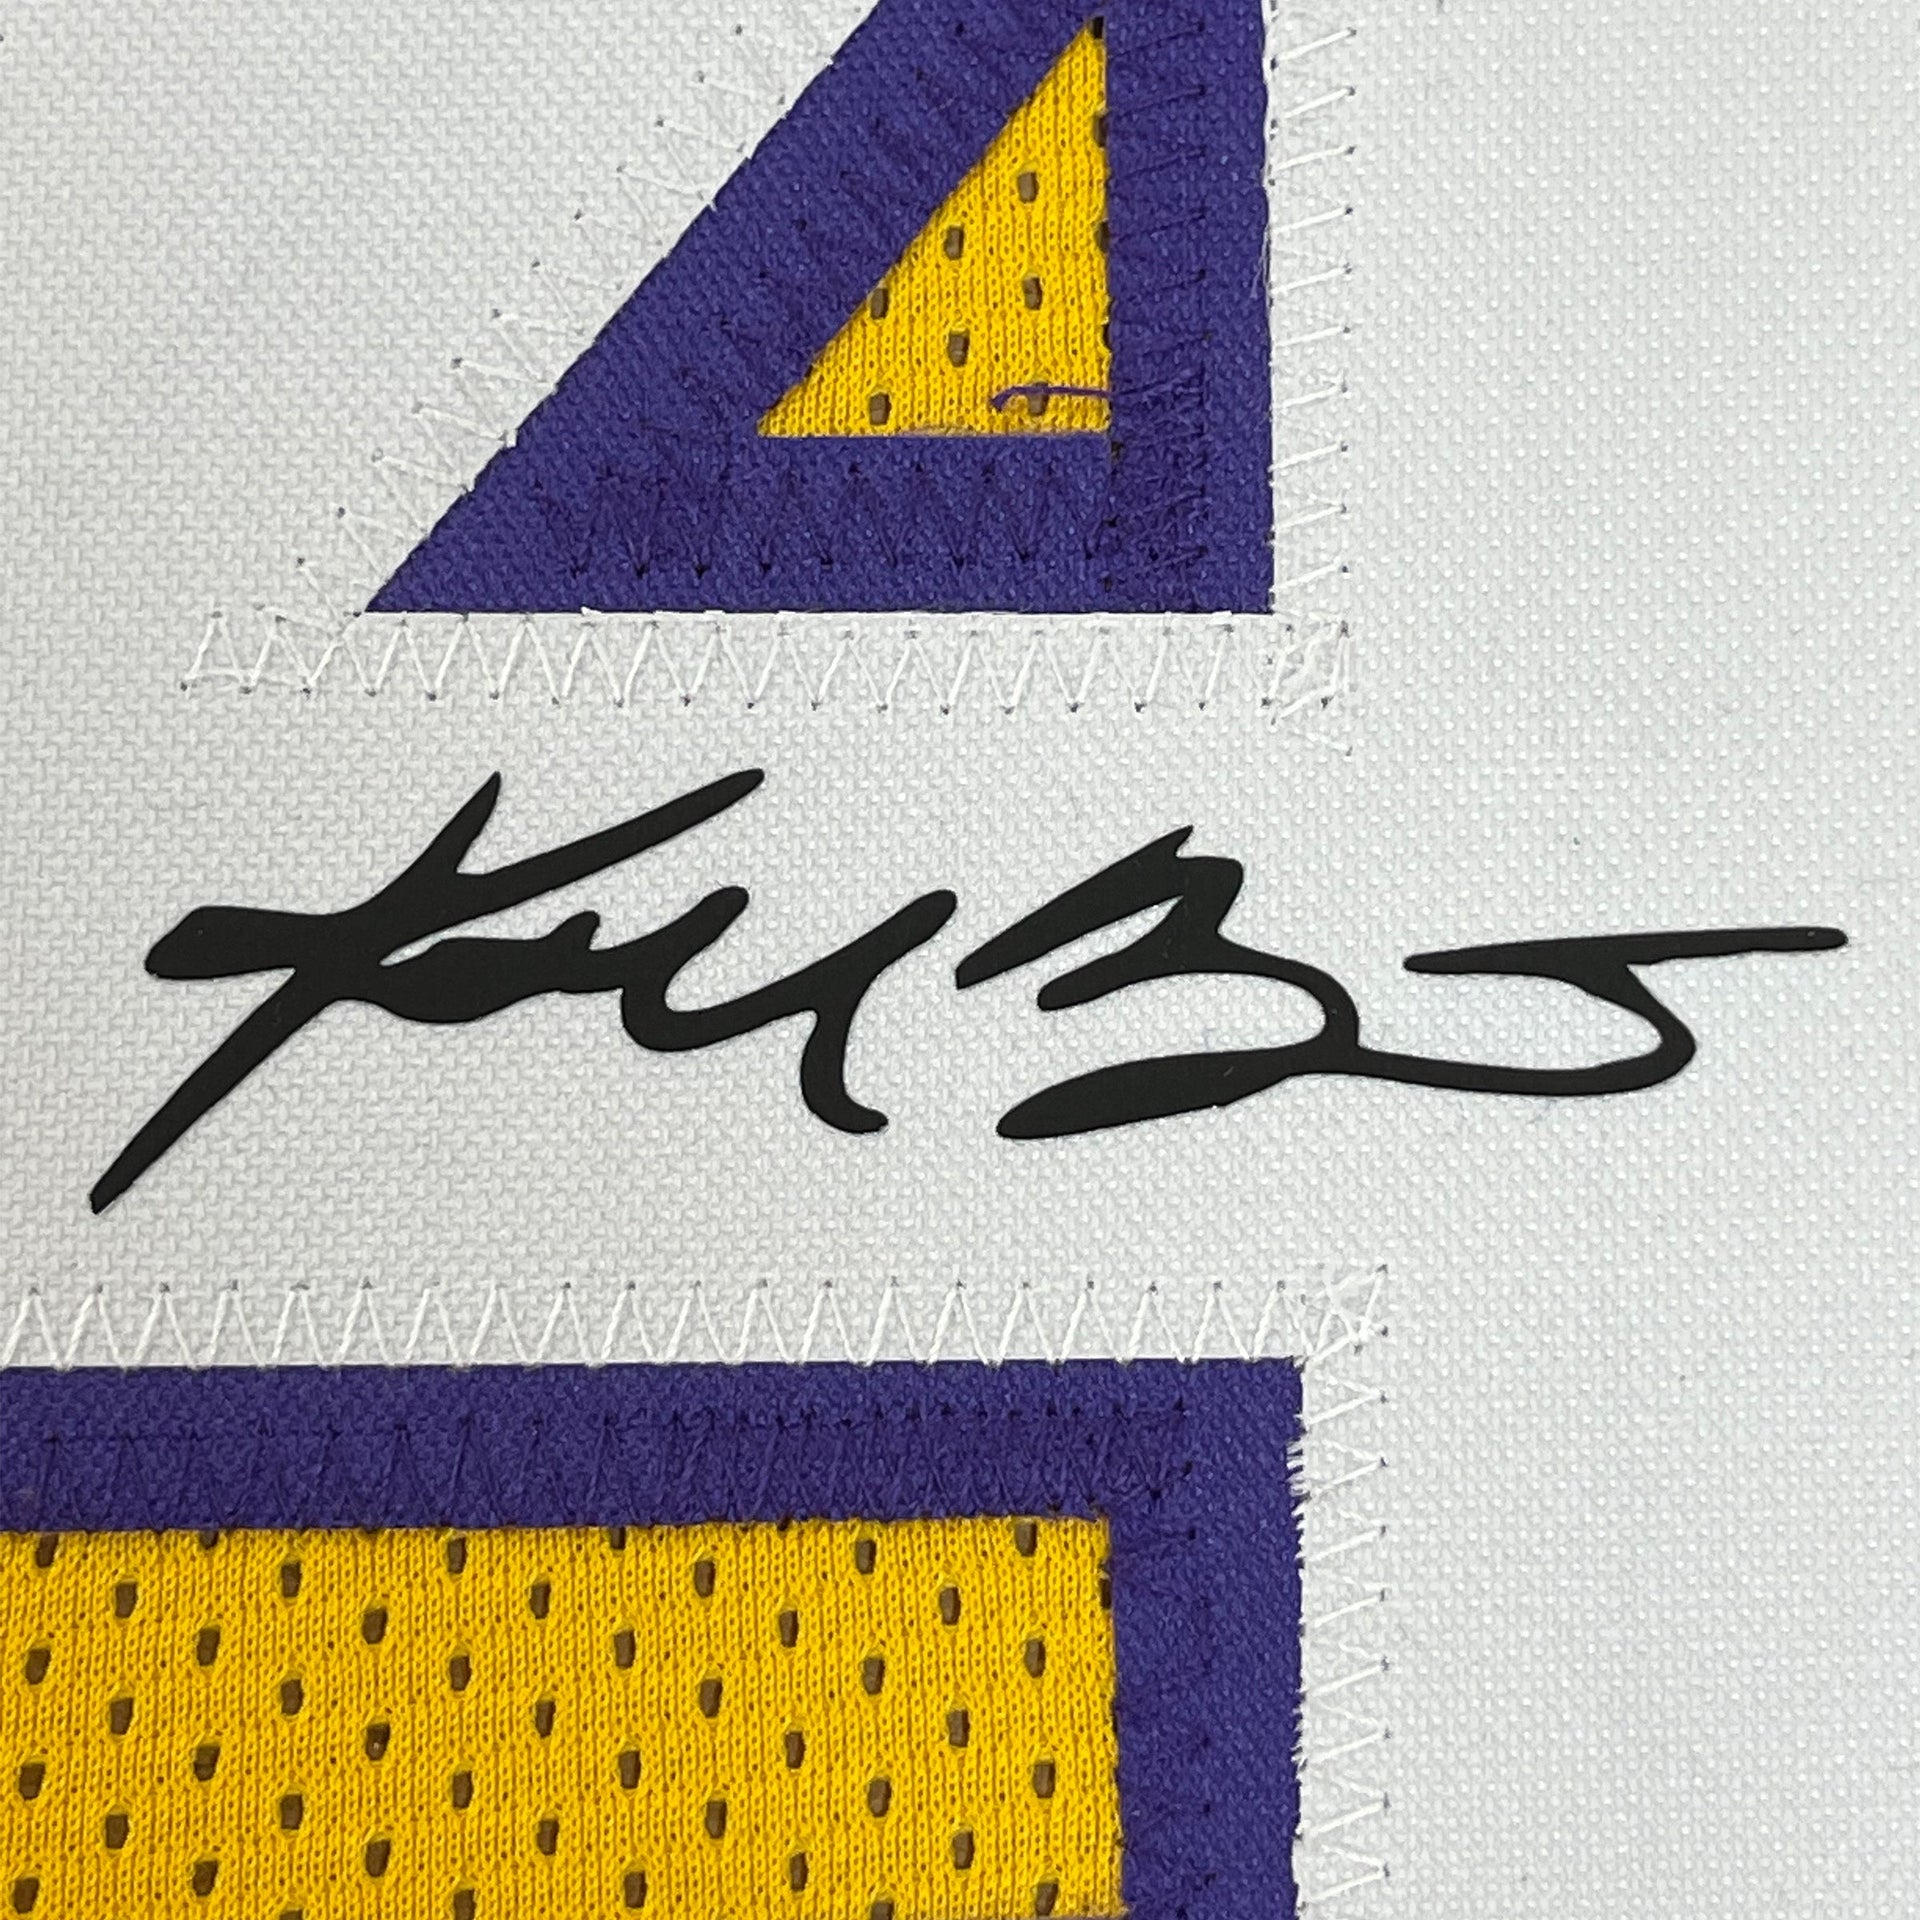 Framed Facsimile Autographed LeBron James 33x42 Los Angeles LA Yellow  Reprint Laser Auto Basketball Jersey at 's Sports Collectibles Store